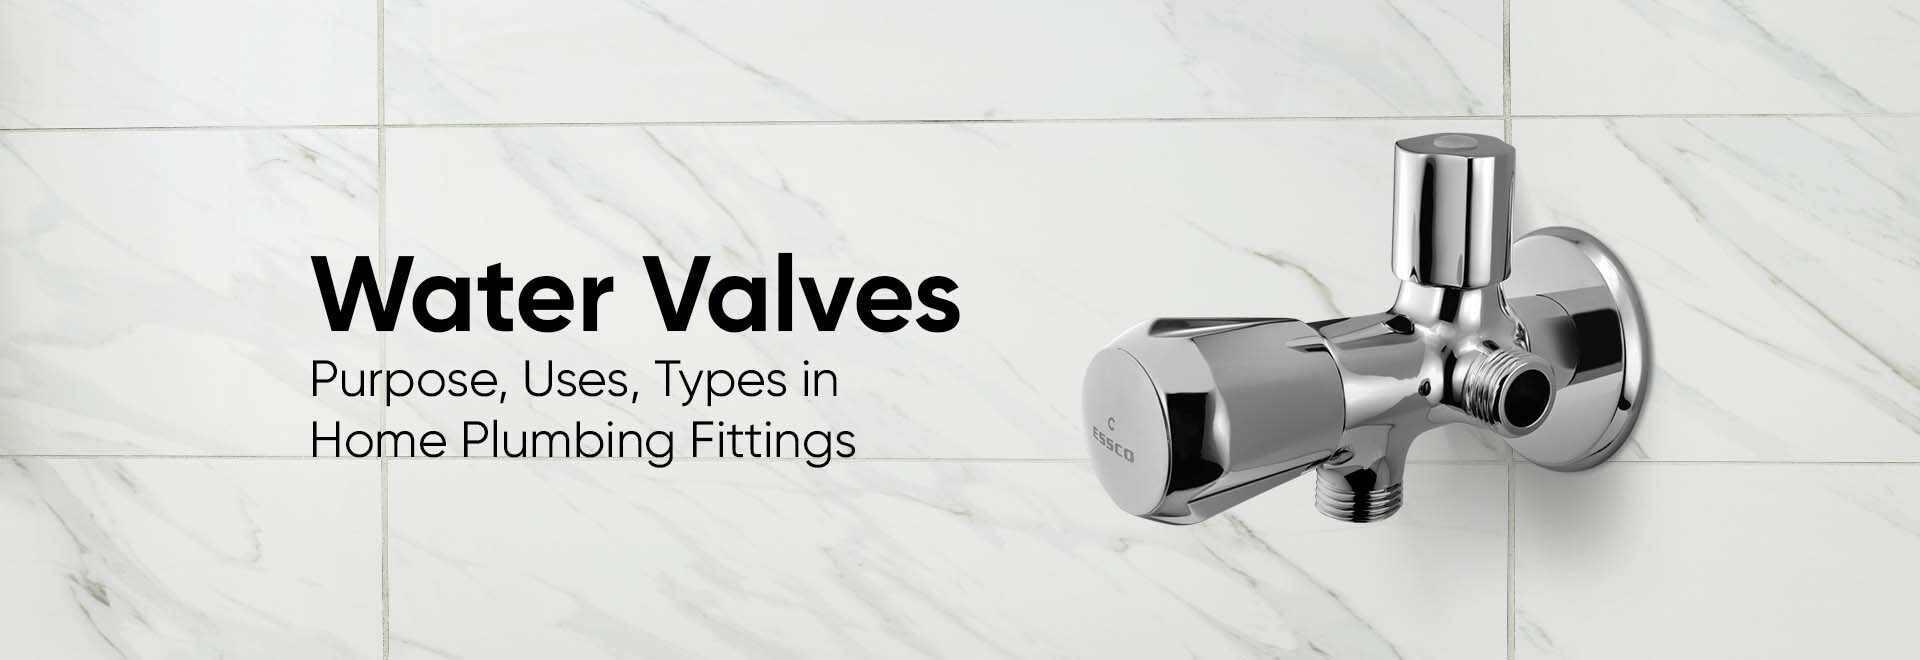 Water Valves - Purpose, Uses, Types in Home Plumbing Fittings